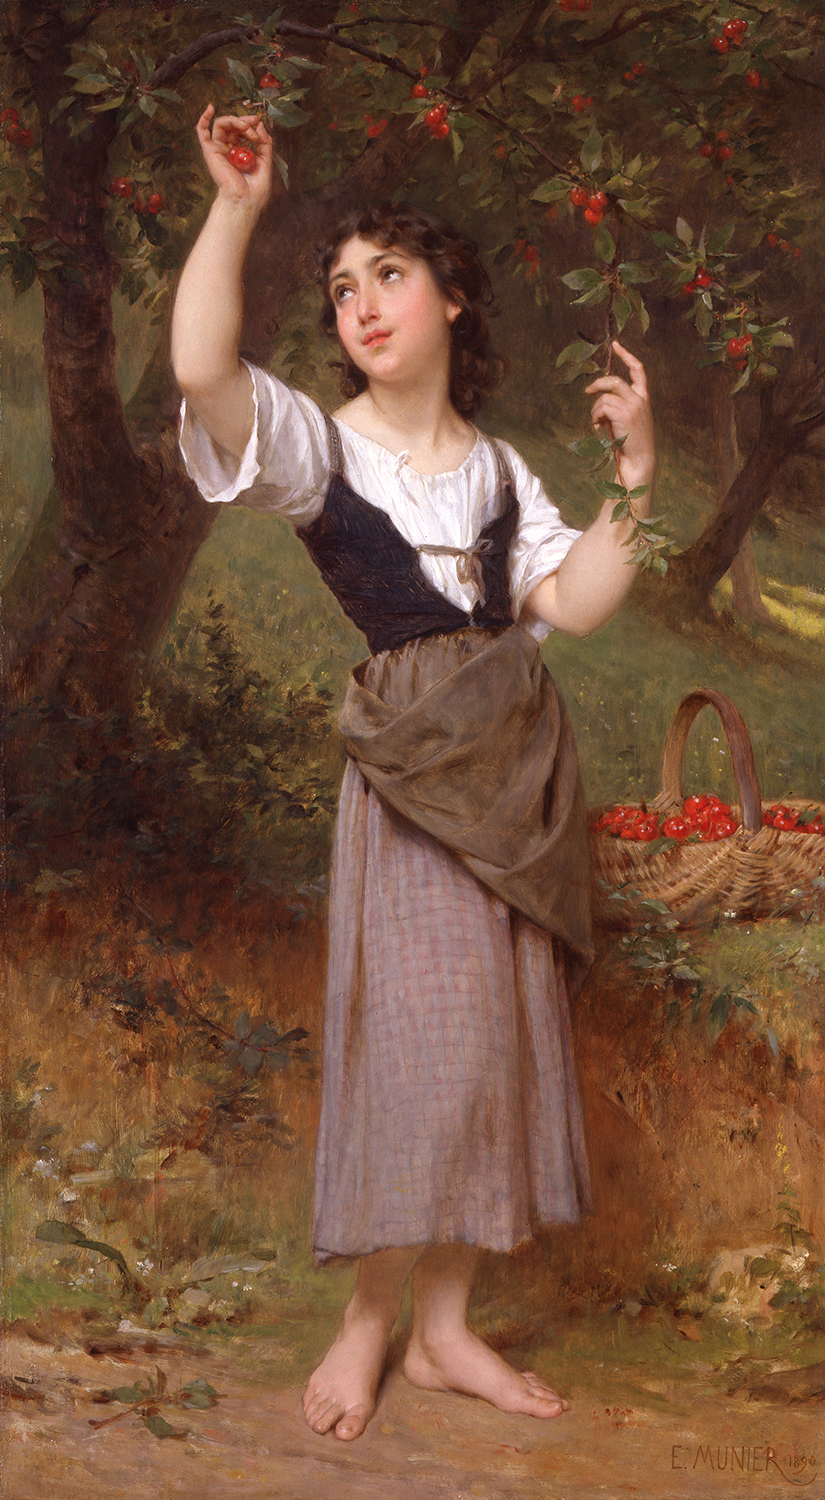 A young woman picking cherries - The Cherry Tree - Emile Munier